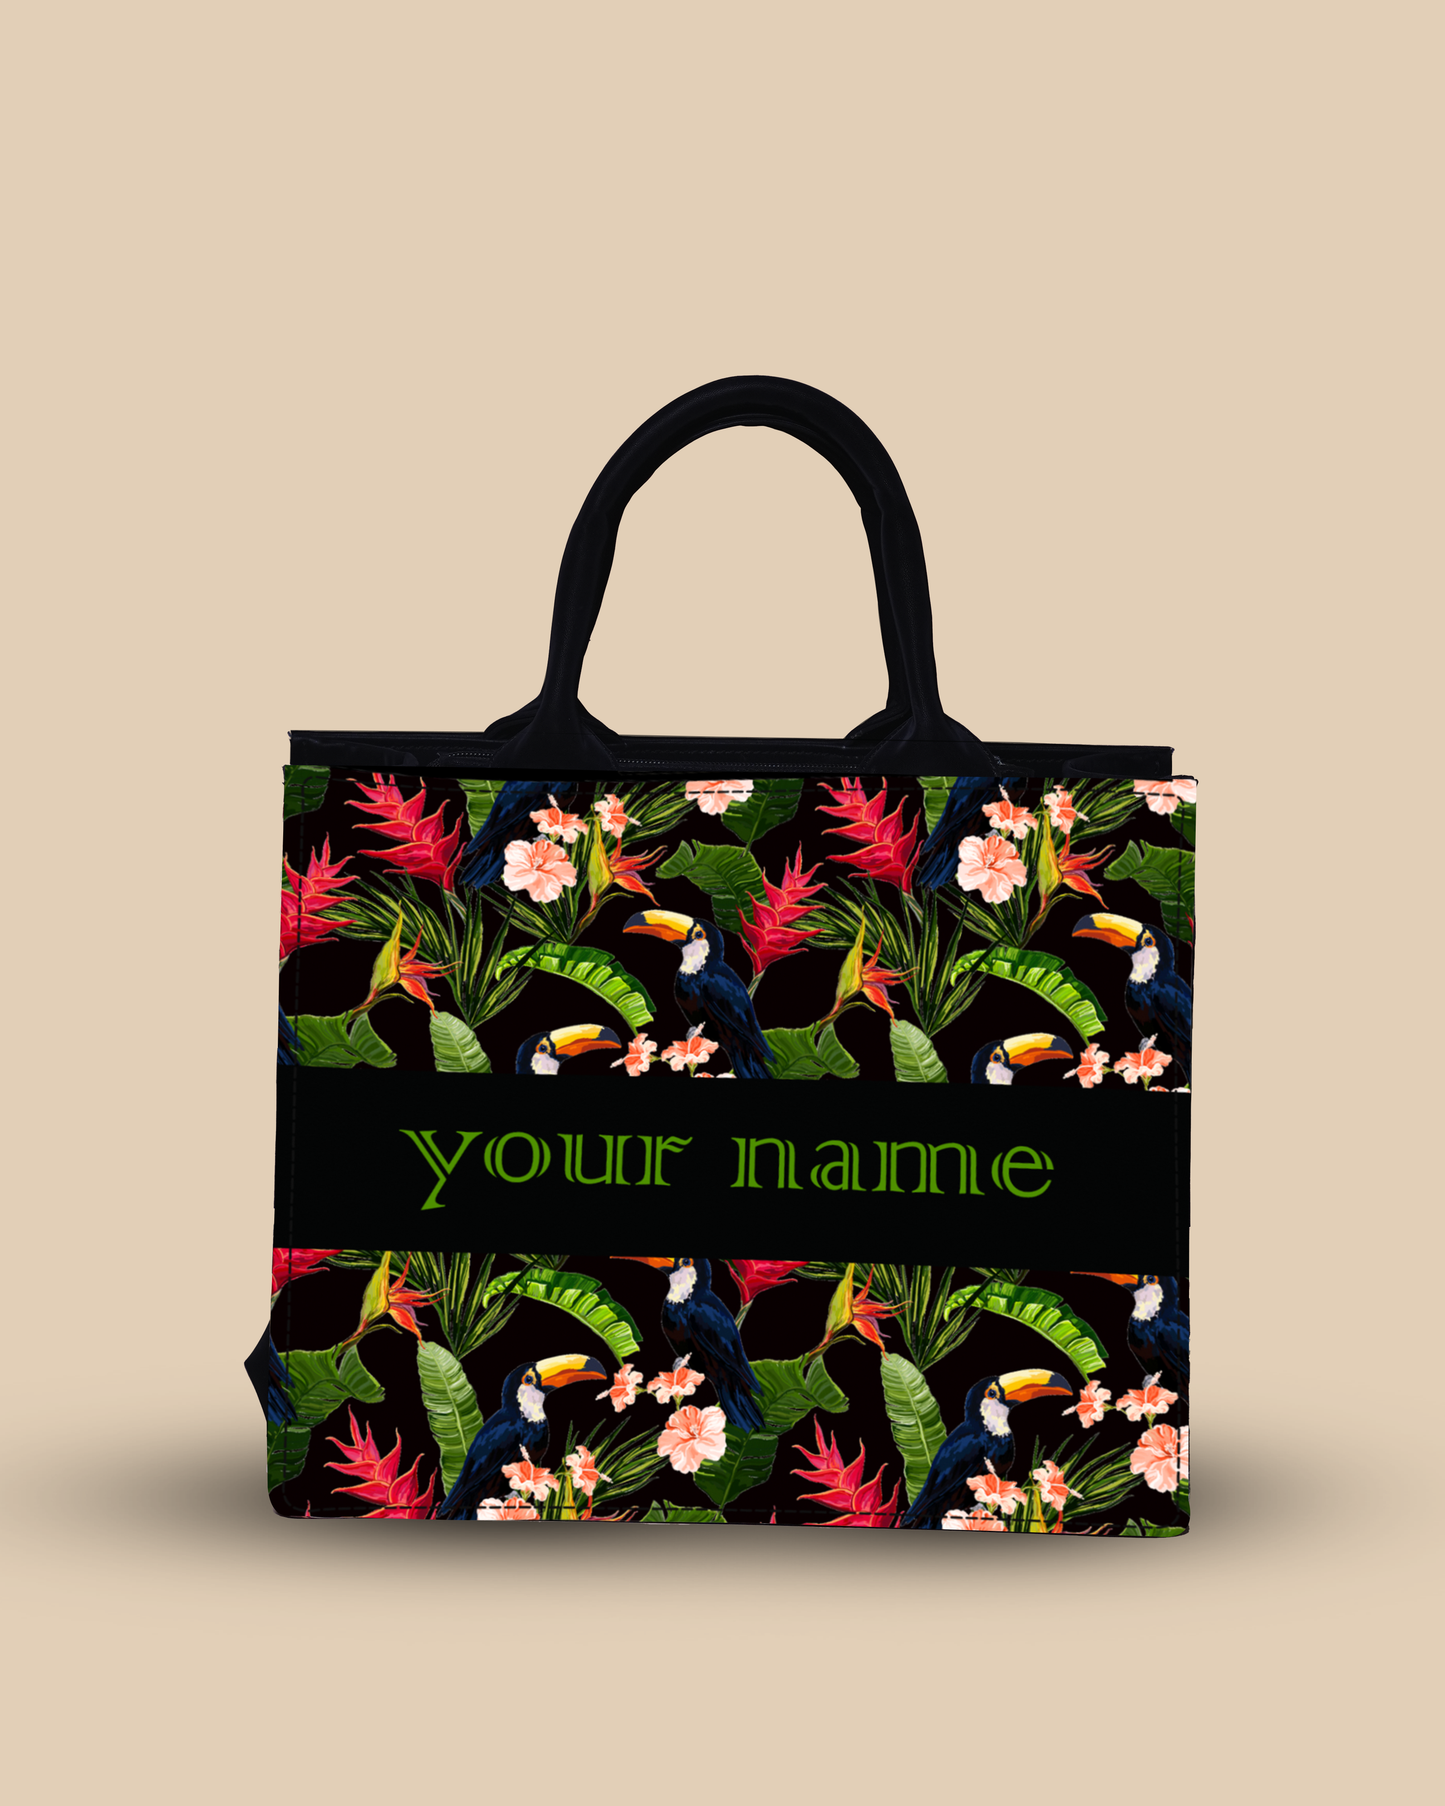 Customized small Tote Bag Designed With Beautiful Coconut Palm Trees With Birds